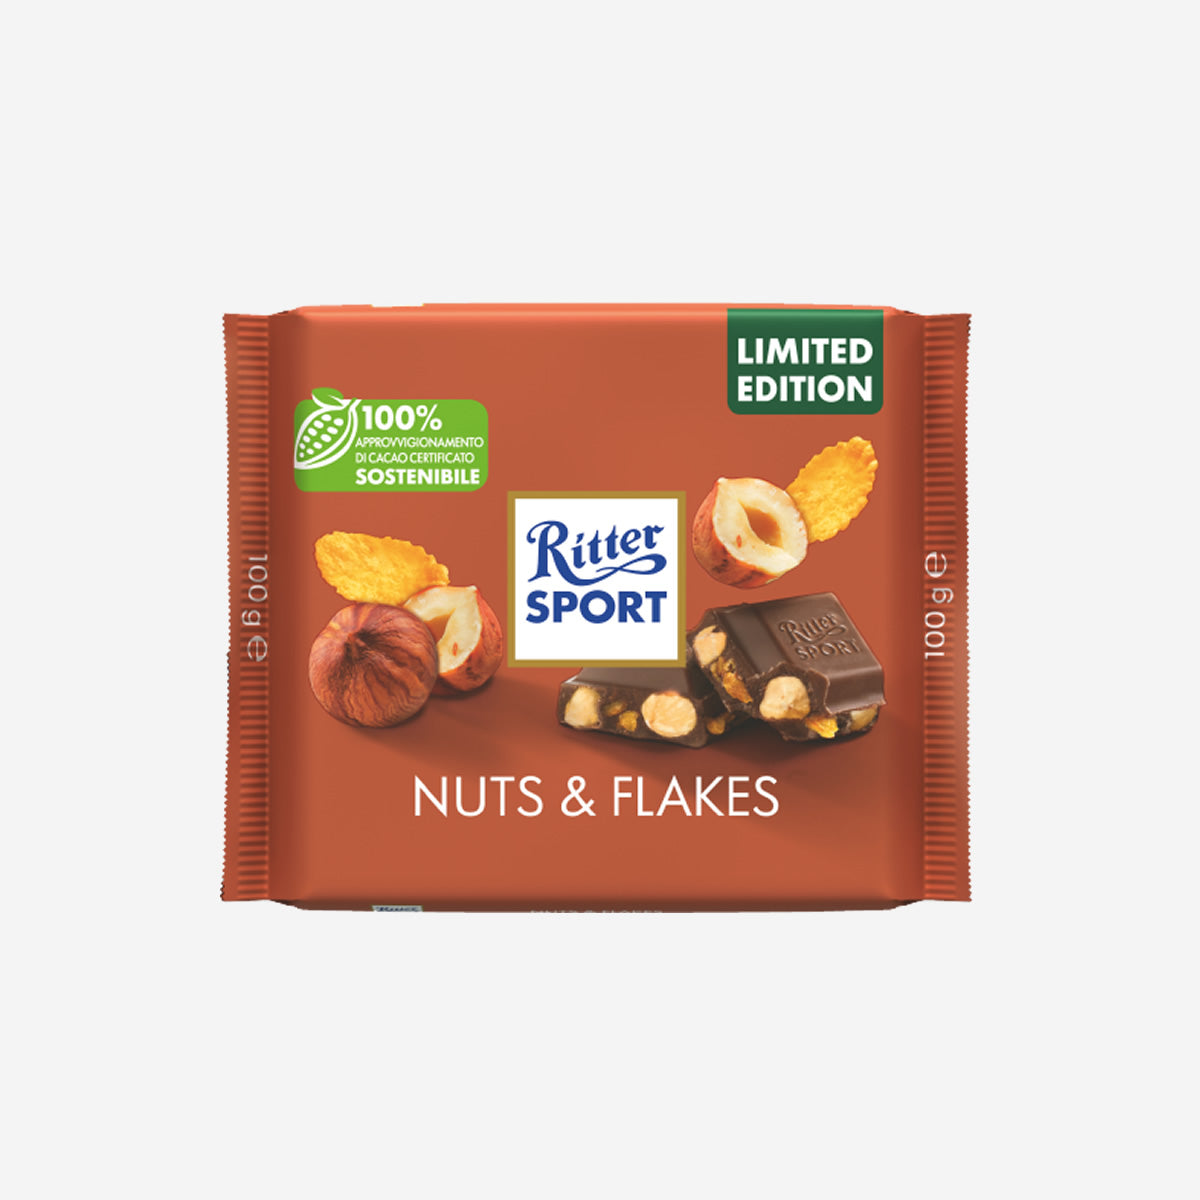 Ritter sport Nuts &amp; Flakes